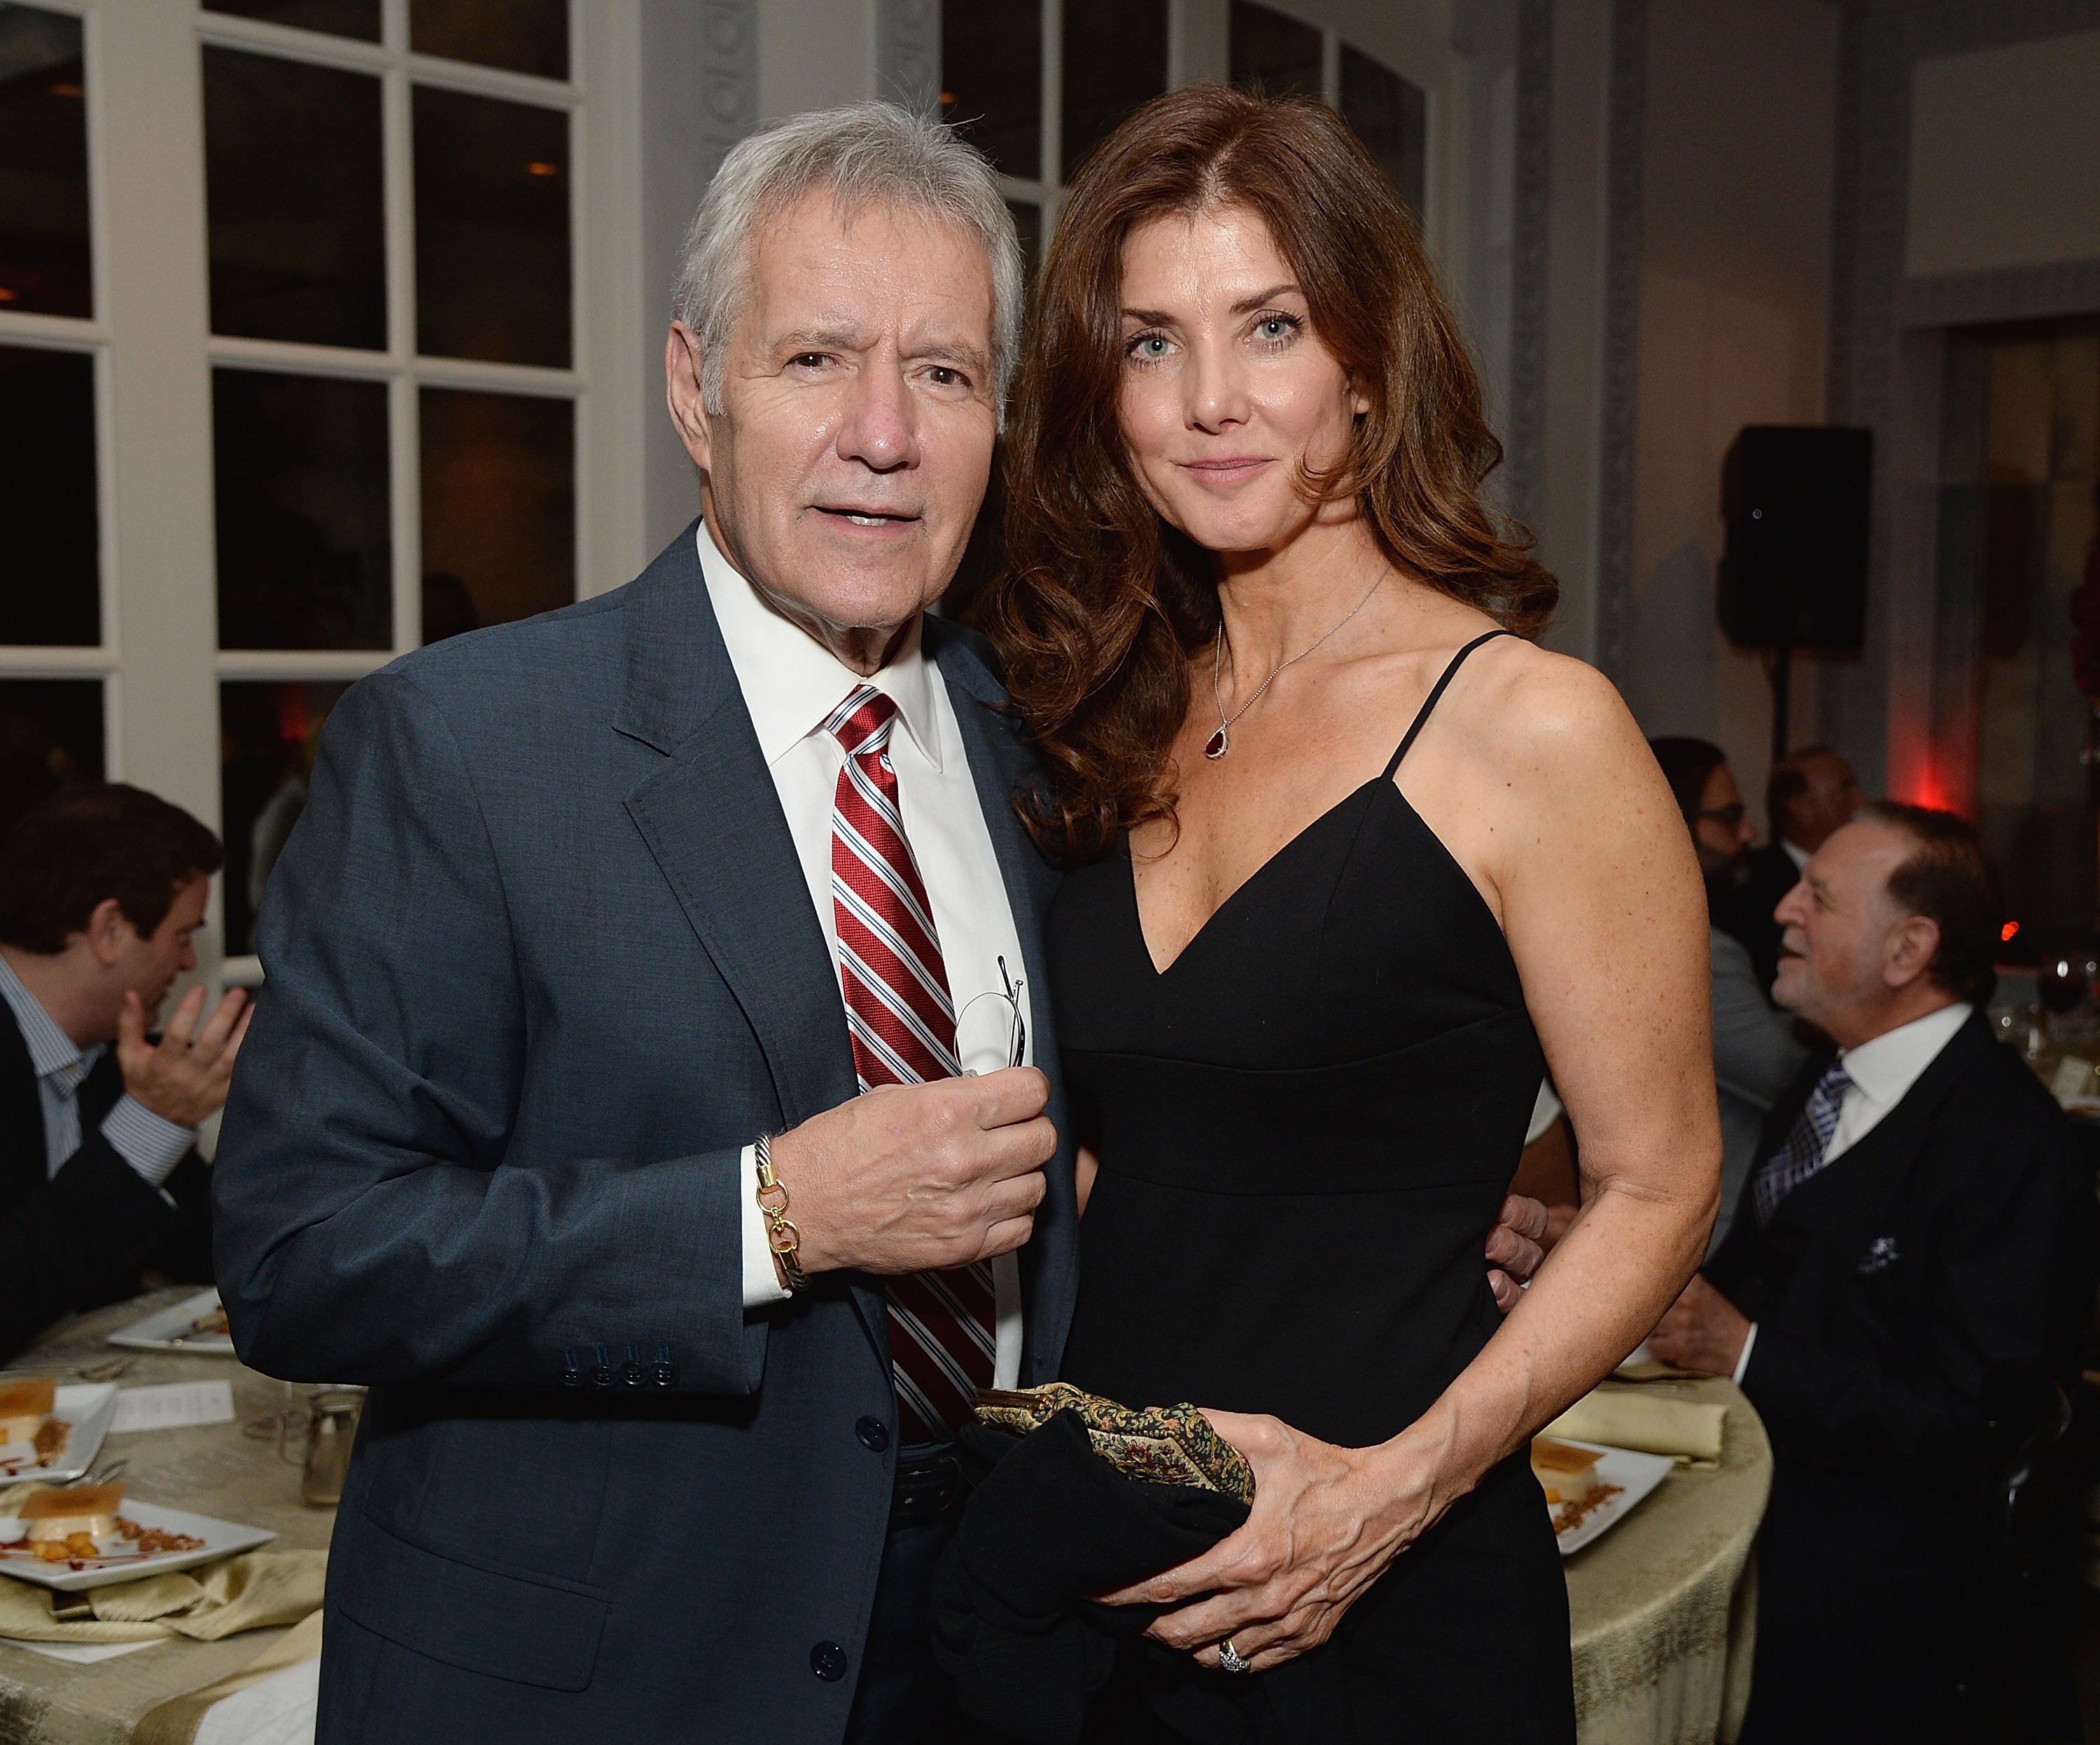  Alex Trebek and Jean Trebek at the celebratory dinner after the special tribute to Sophia Loren during the AFI FEST 2014 presented by Audi at Dolby Theatre in Los Angeles, California | Photo: Michael Kovac/Getty Images for AFI